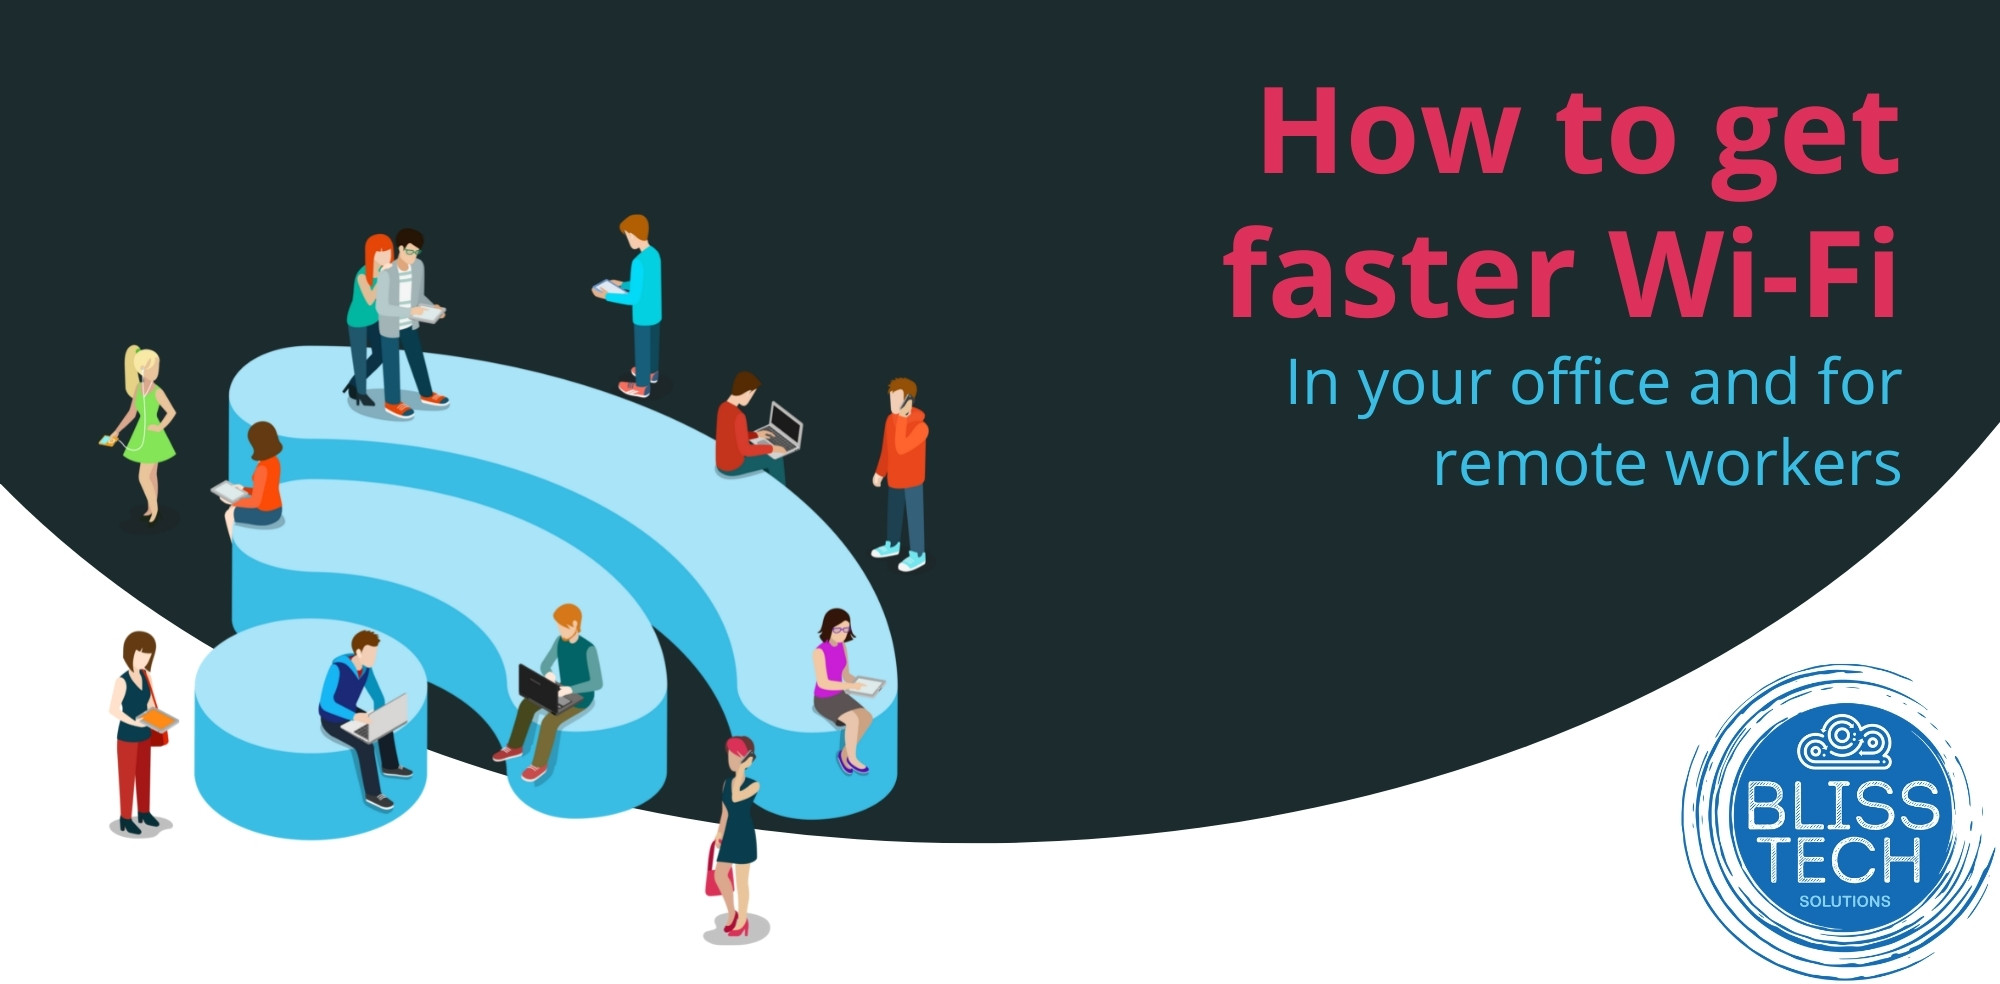 How to get faster Wi-Fi in your office and for remote workers